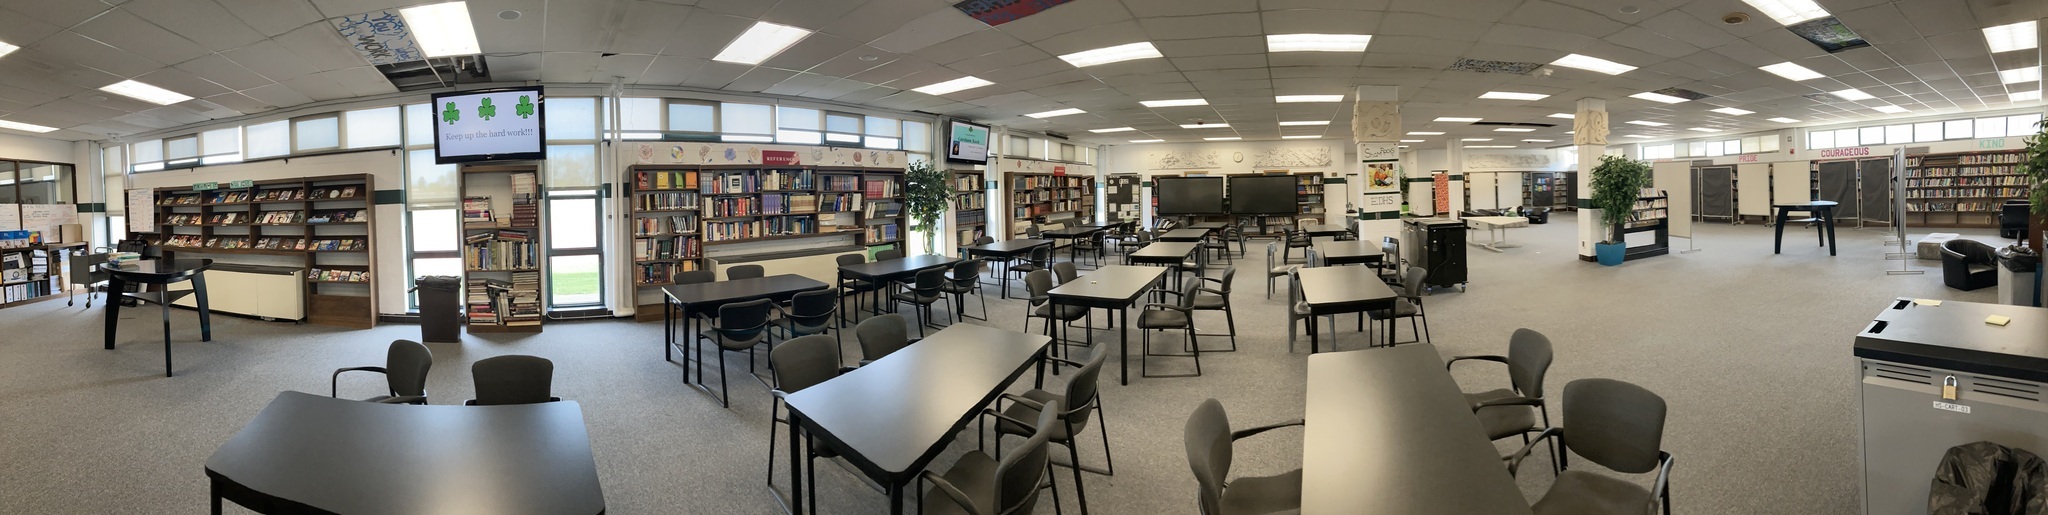 EHS Library - panoramic